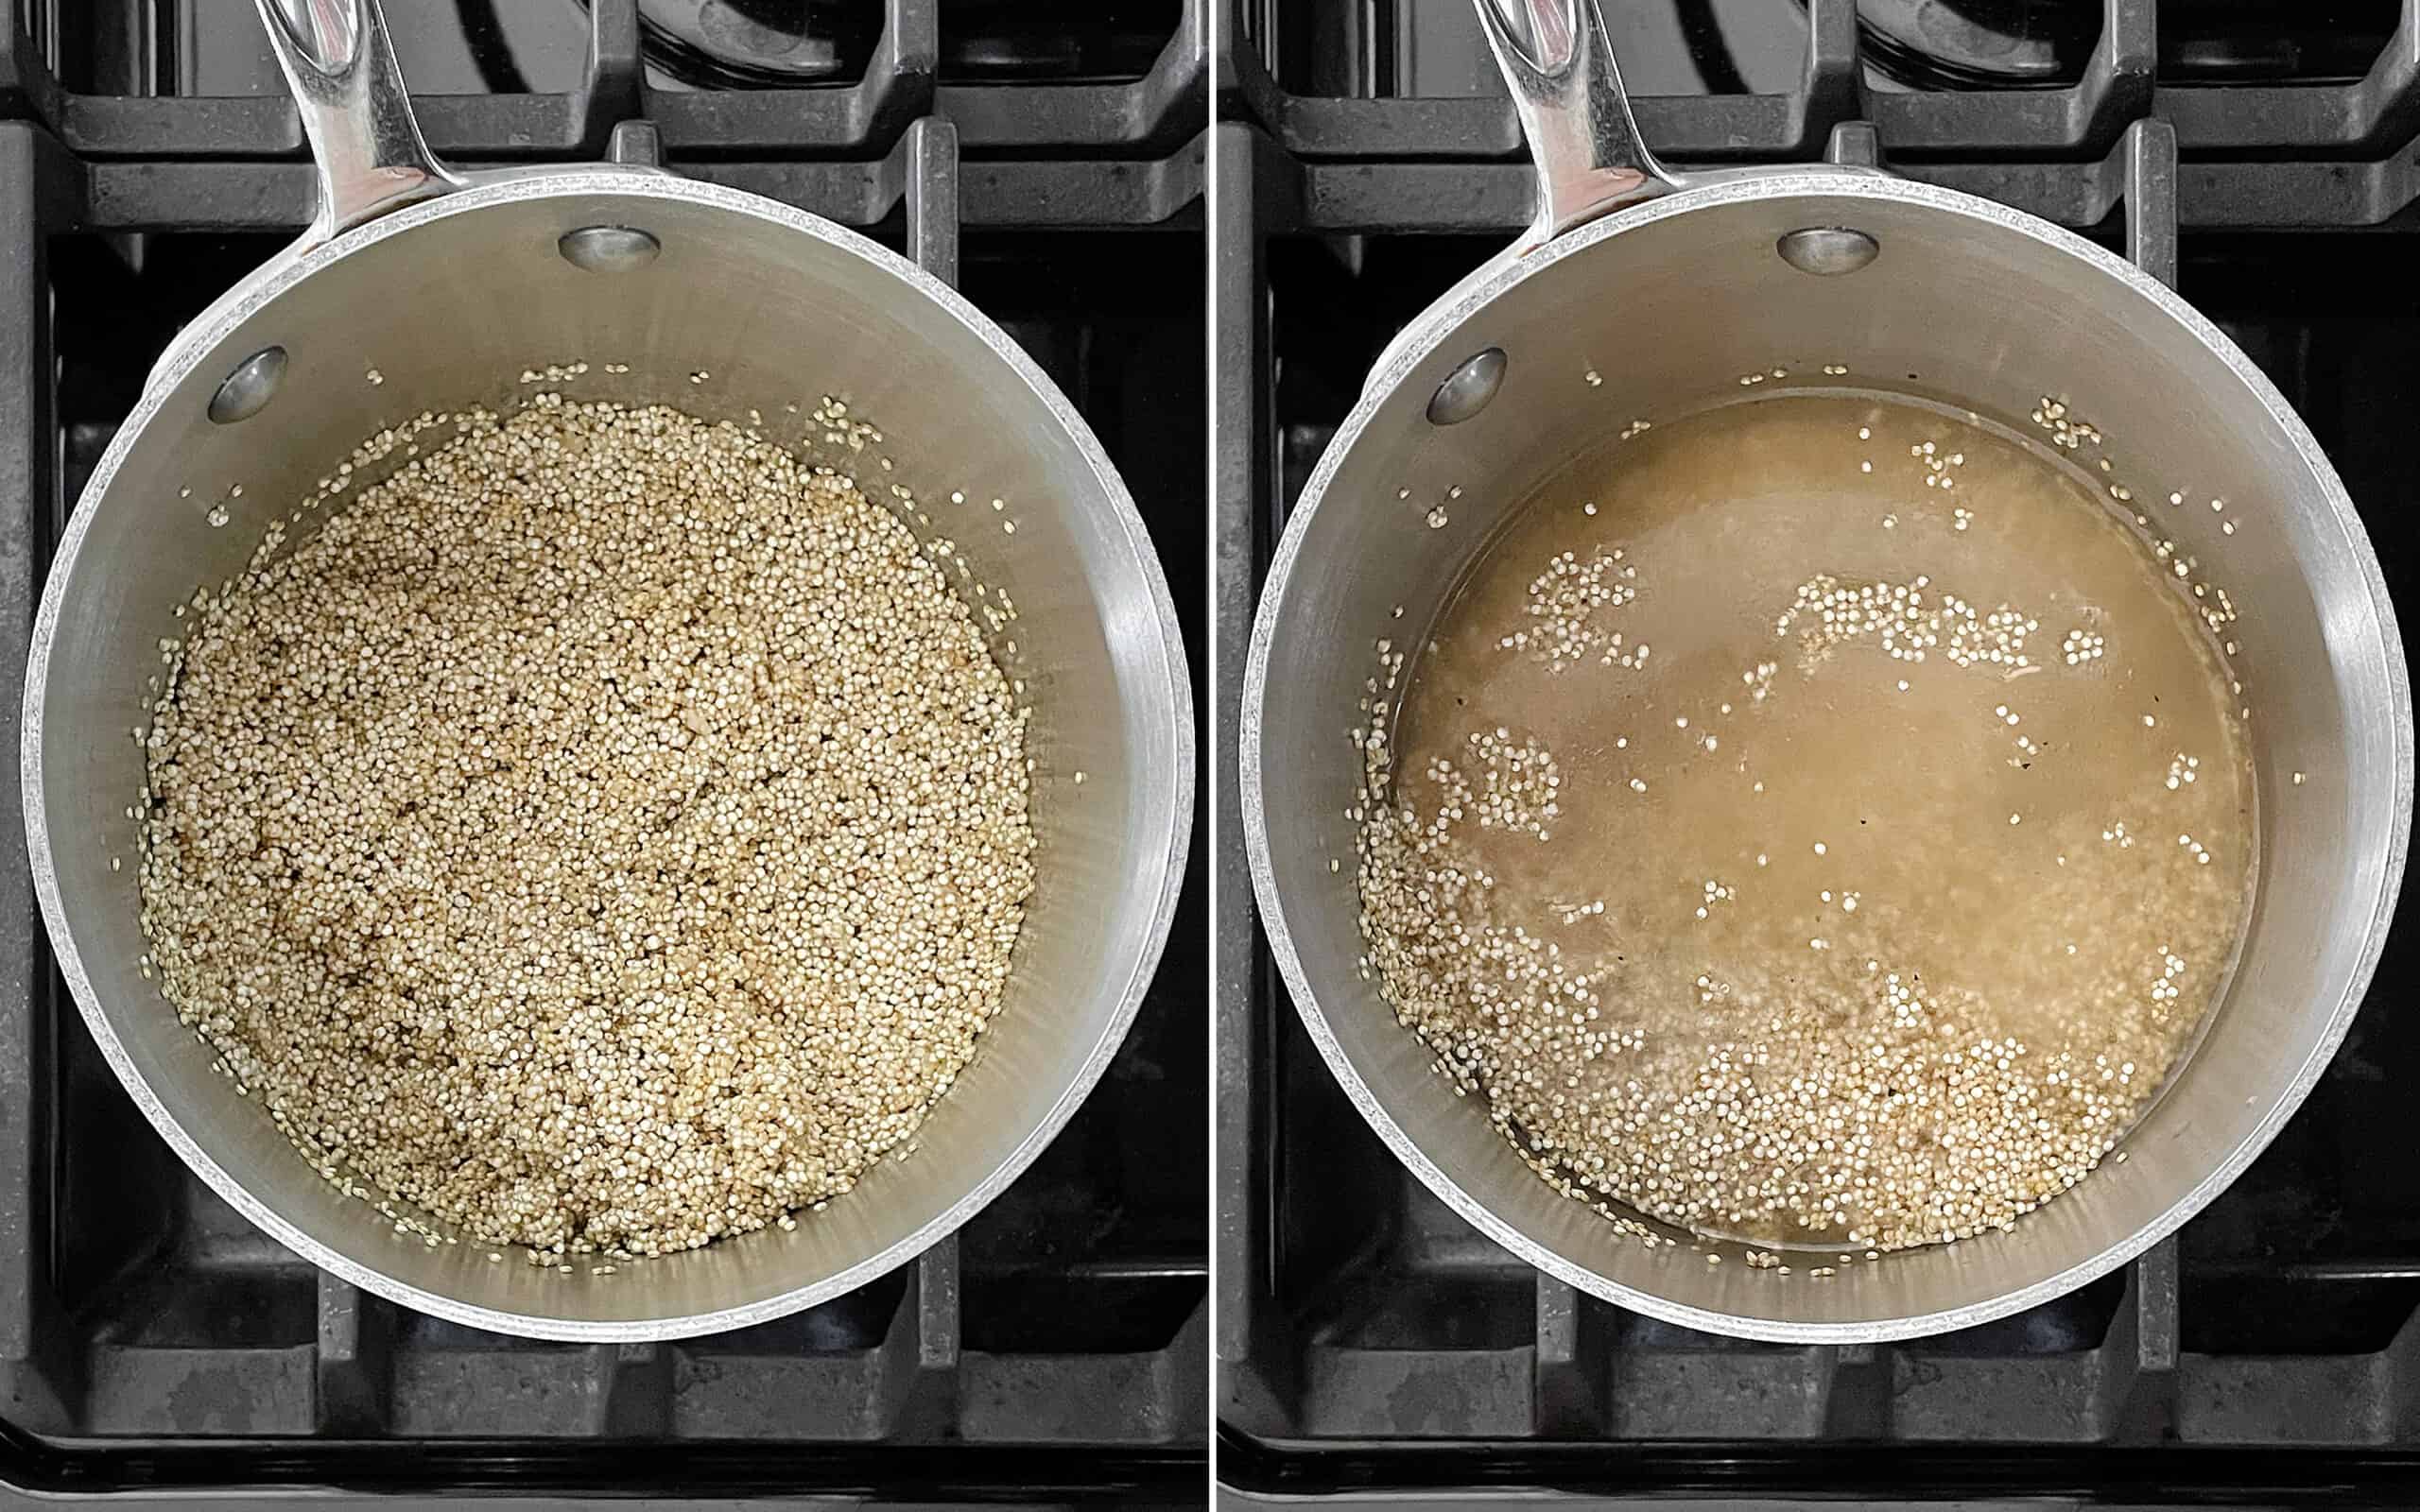 Toast the quinoa in the pot on the stove. Then pour in the water.